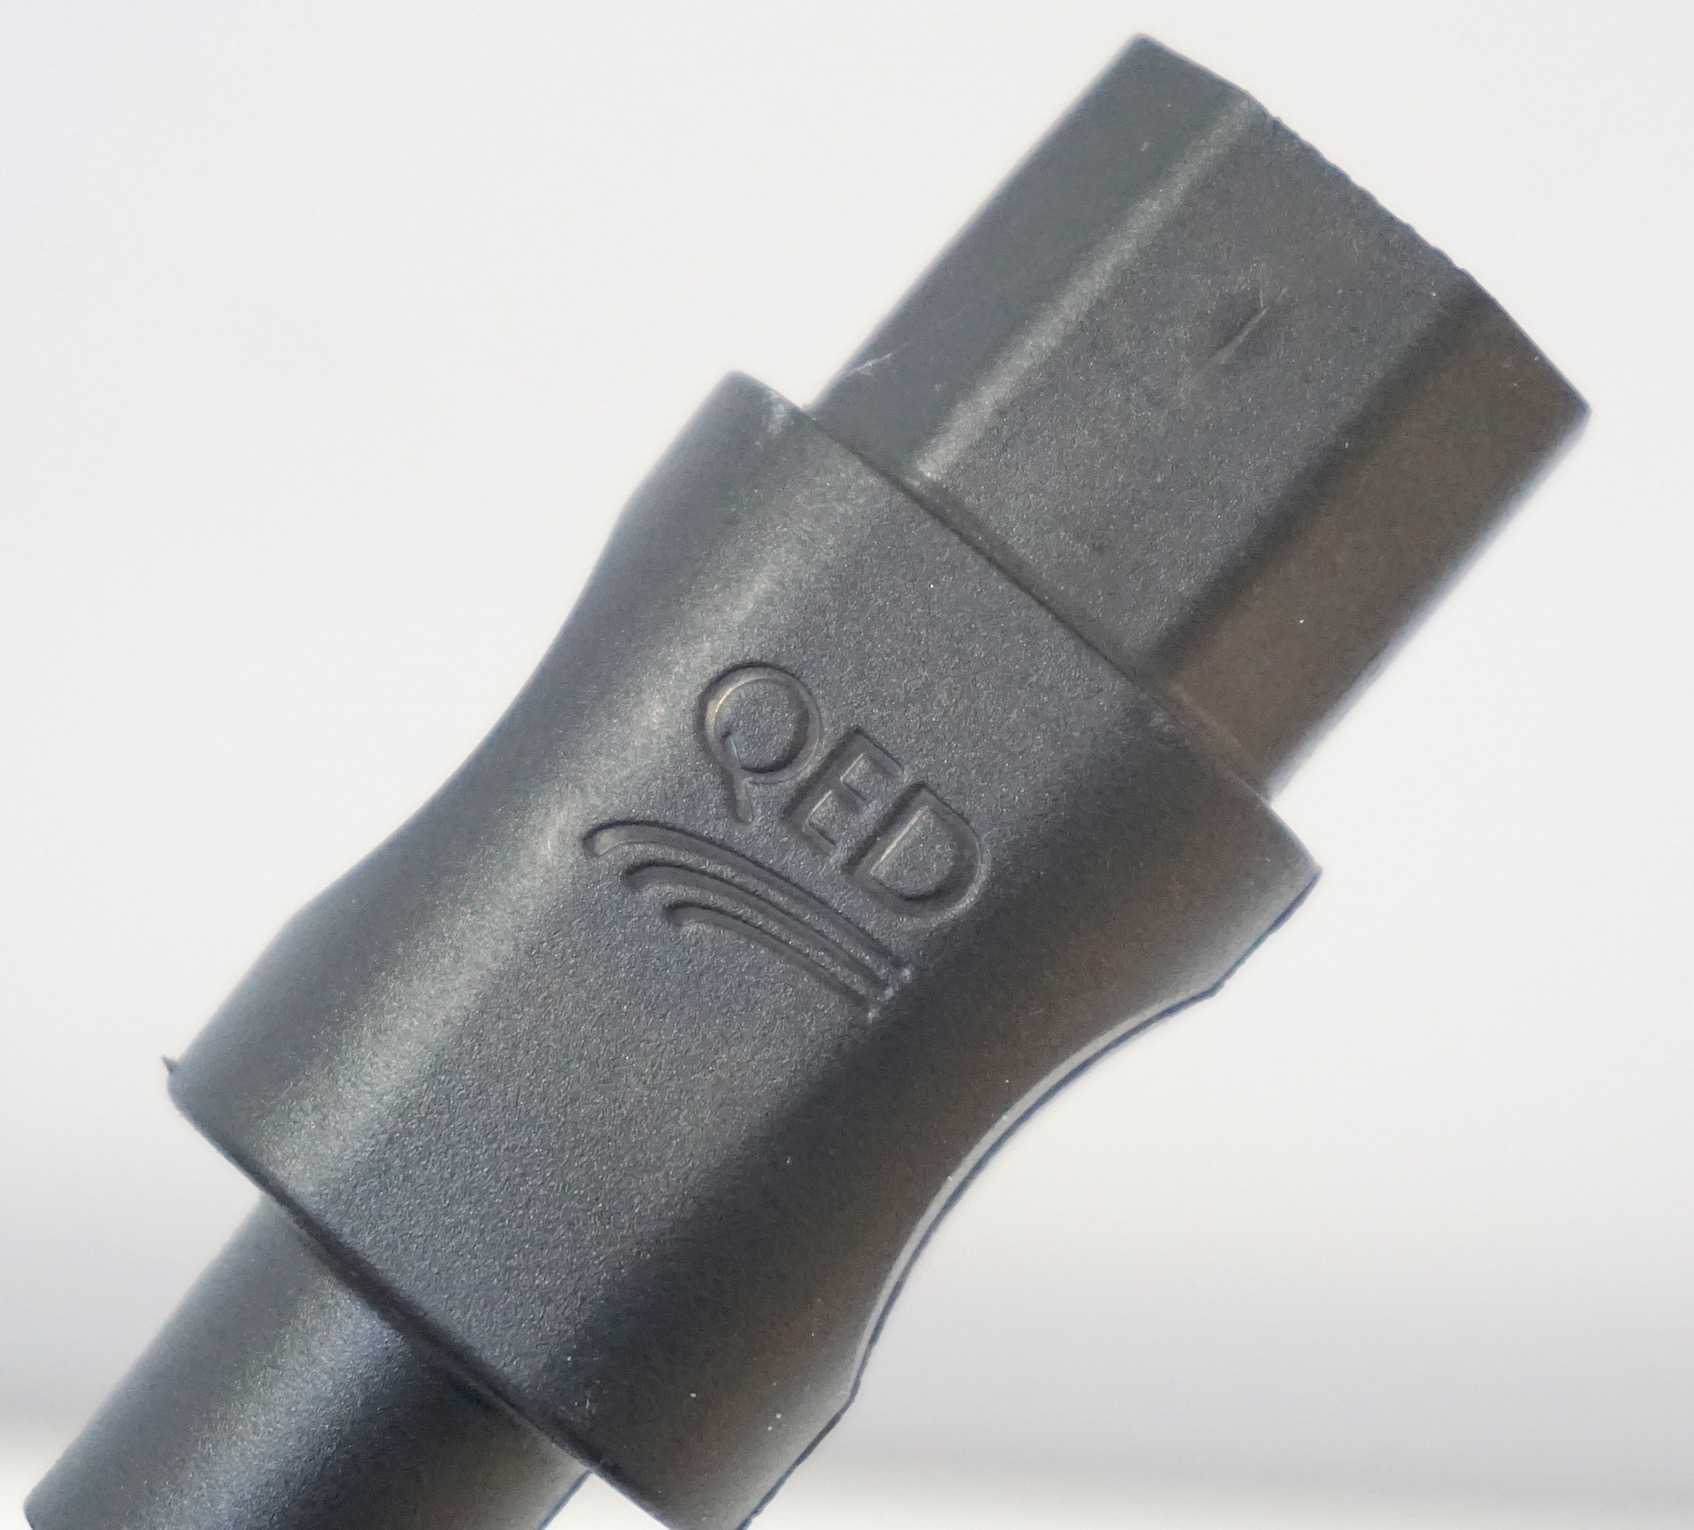 XT3 MAINS CABLE FROM QED